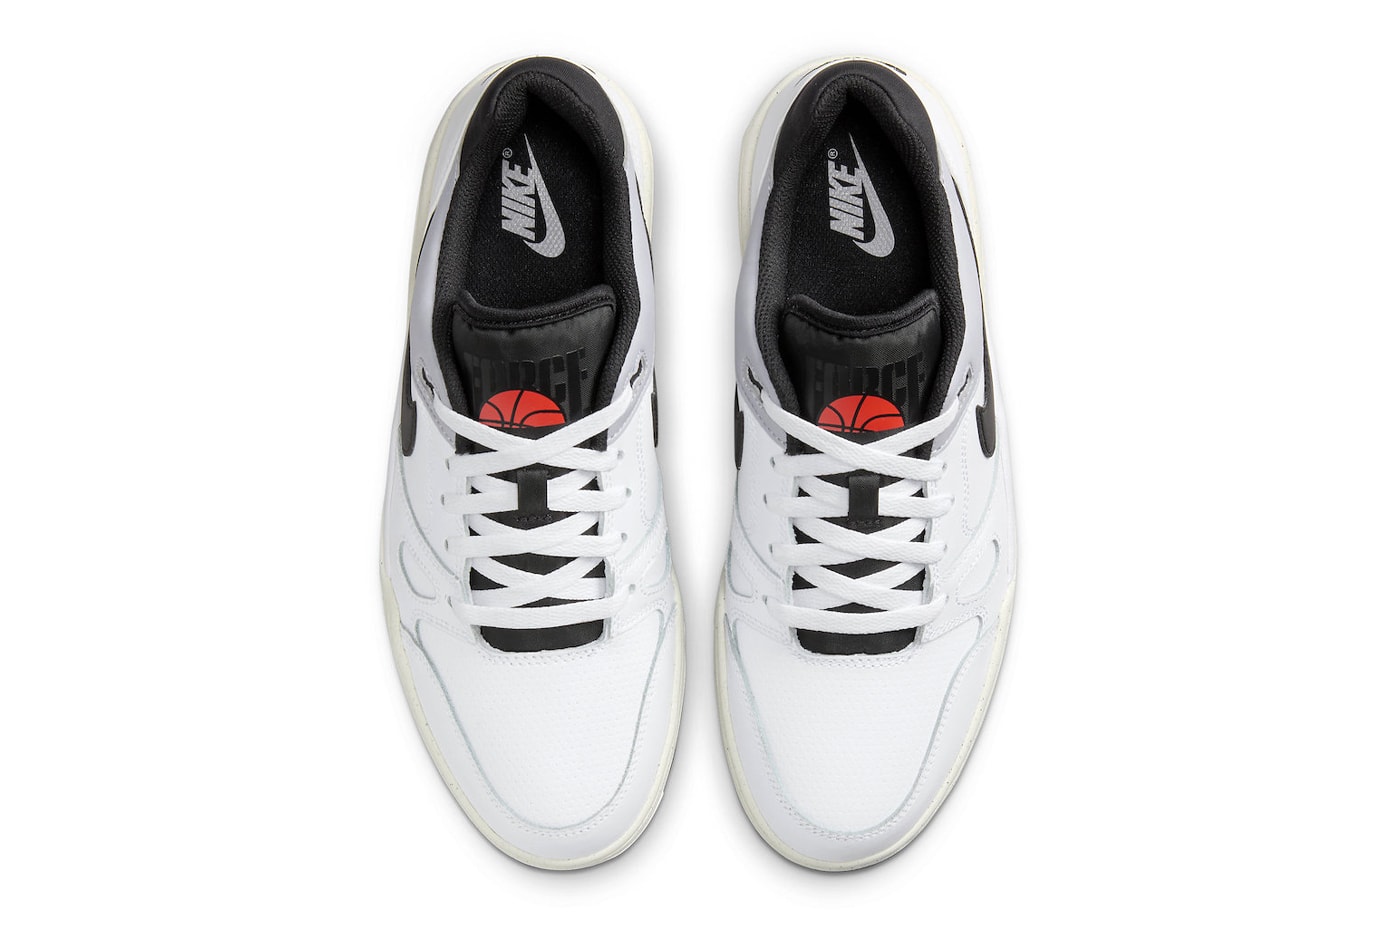 Official Look Nike Full Force Low "White/Black" FB1362-101 swoosh white sneakers basketball